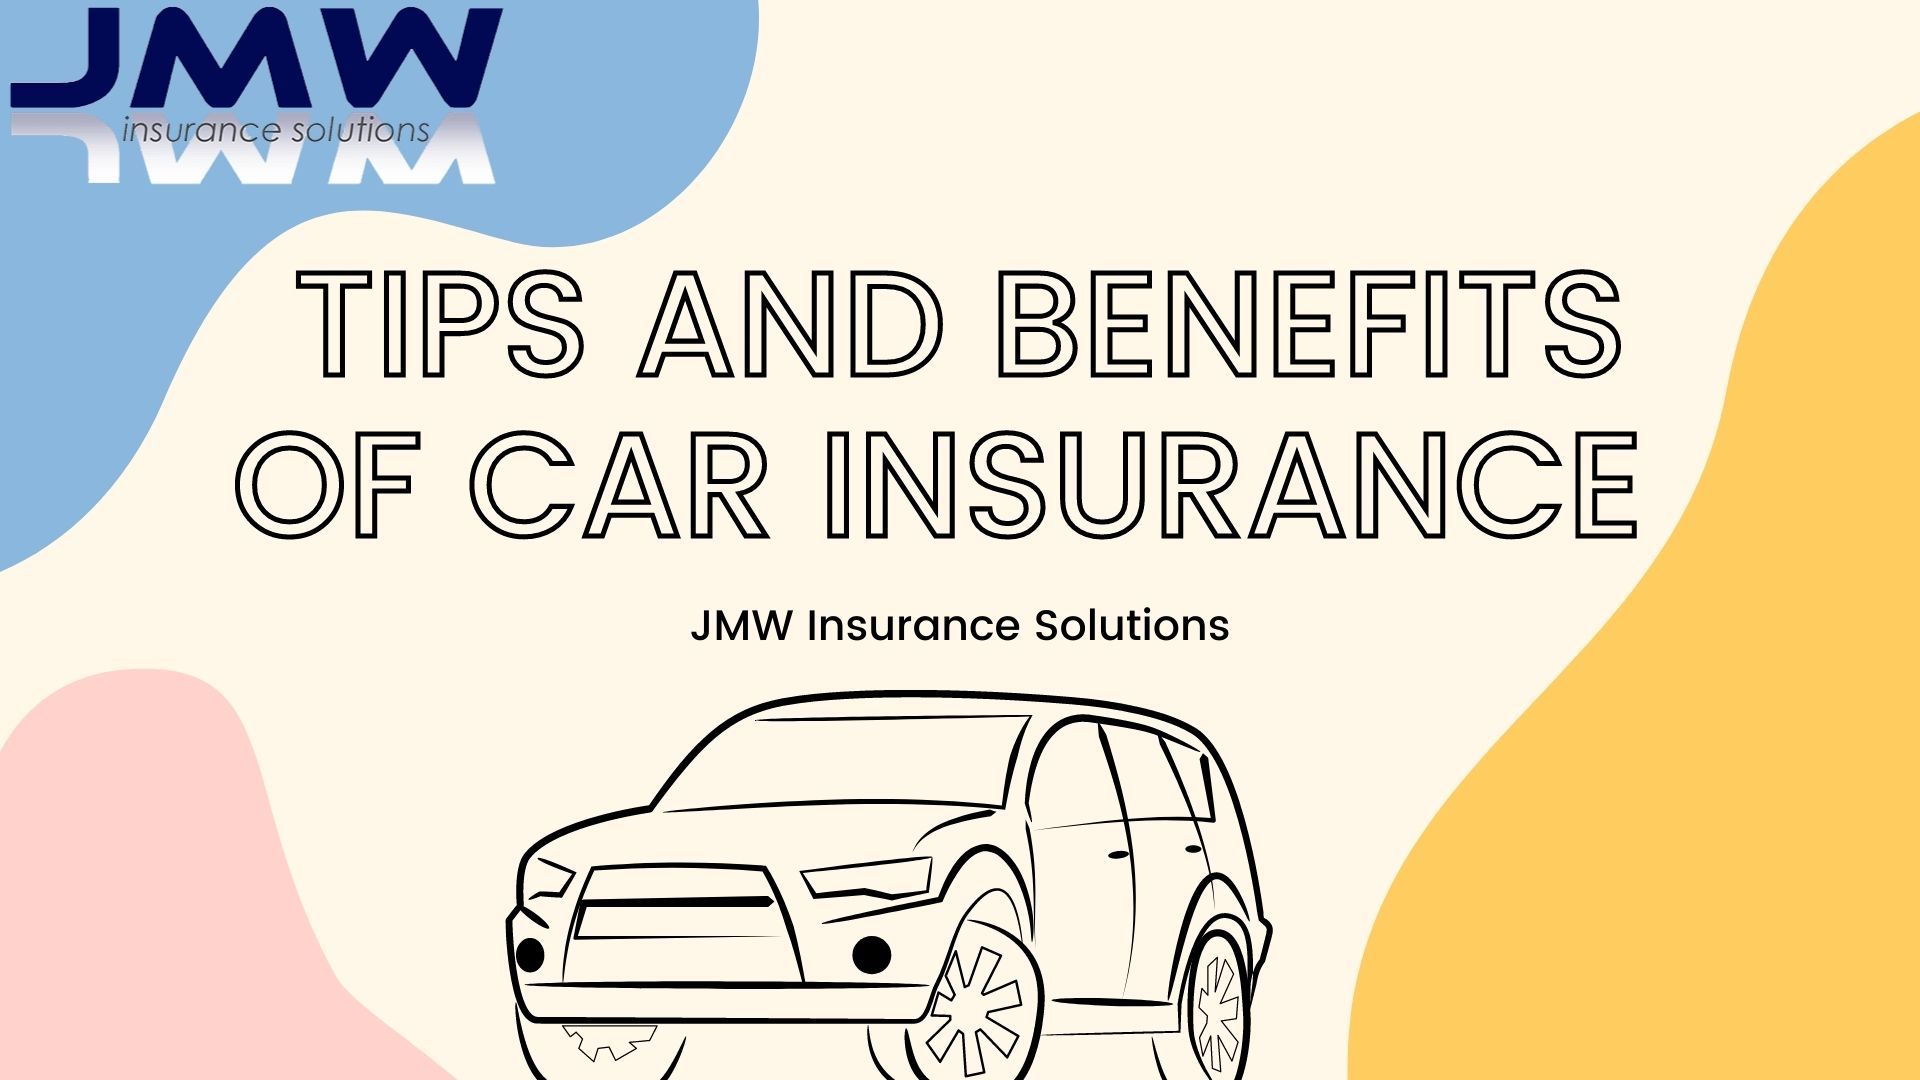 Tips and Benefits of Car Insurance